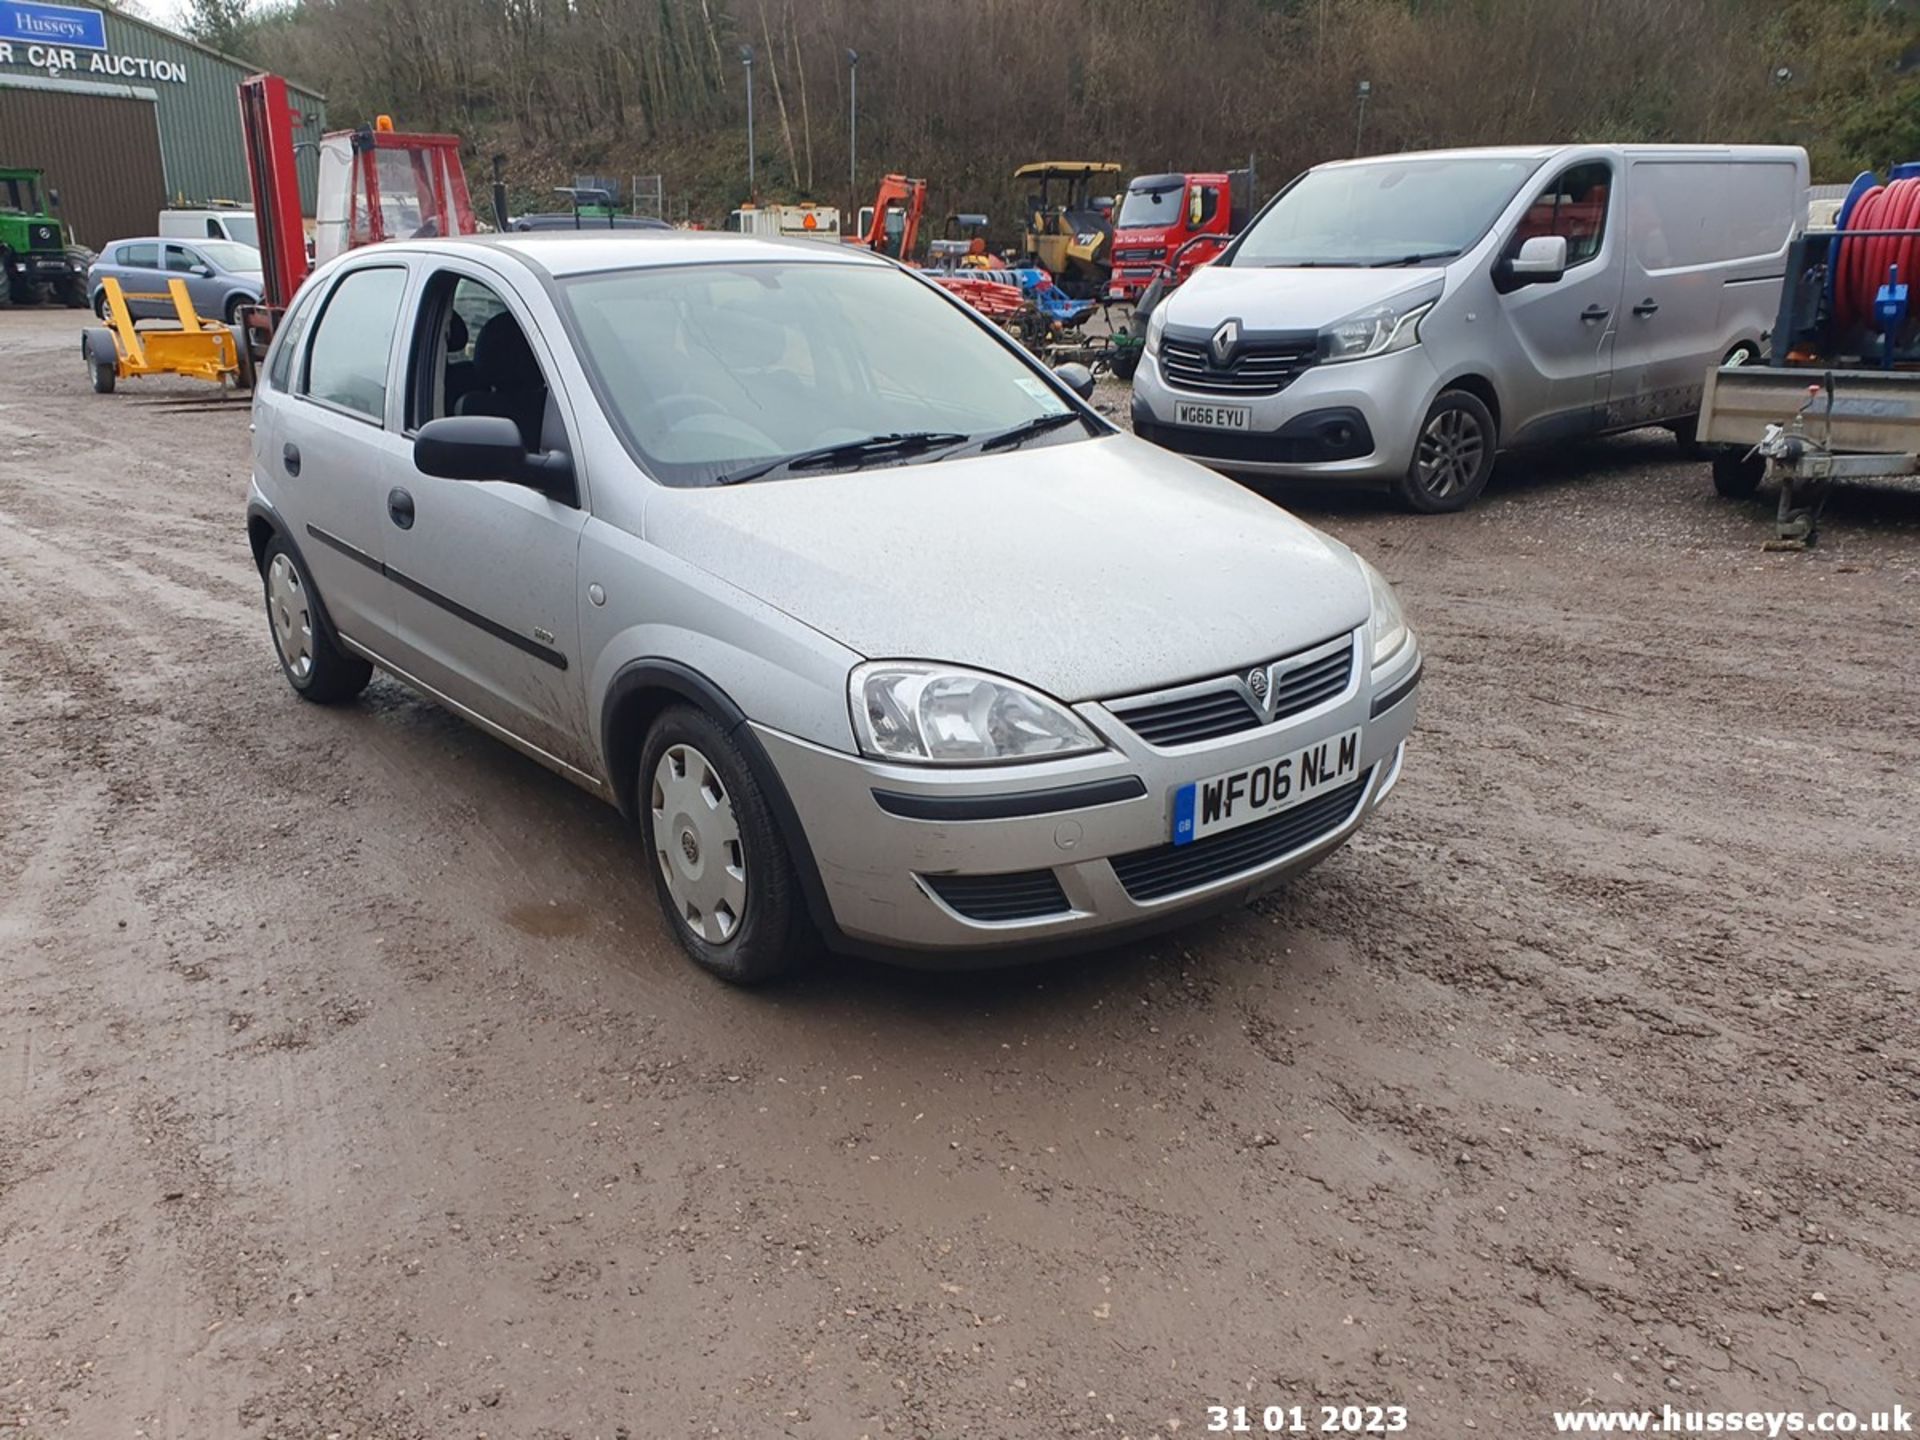 06/06 VAUXHALL CORSA LIFE TWINPORT - 1229cc 5dr Hatchback (Silver, 67k) - Image 5 of 34